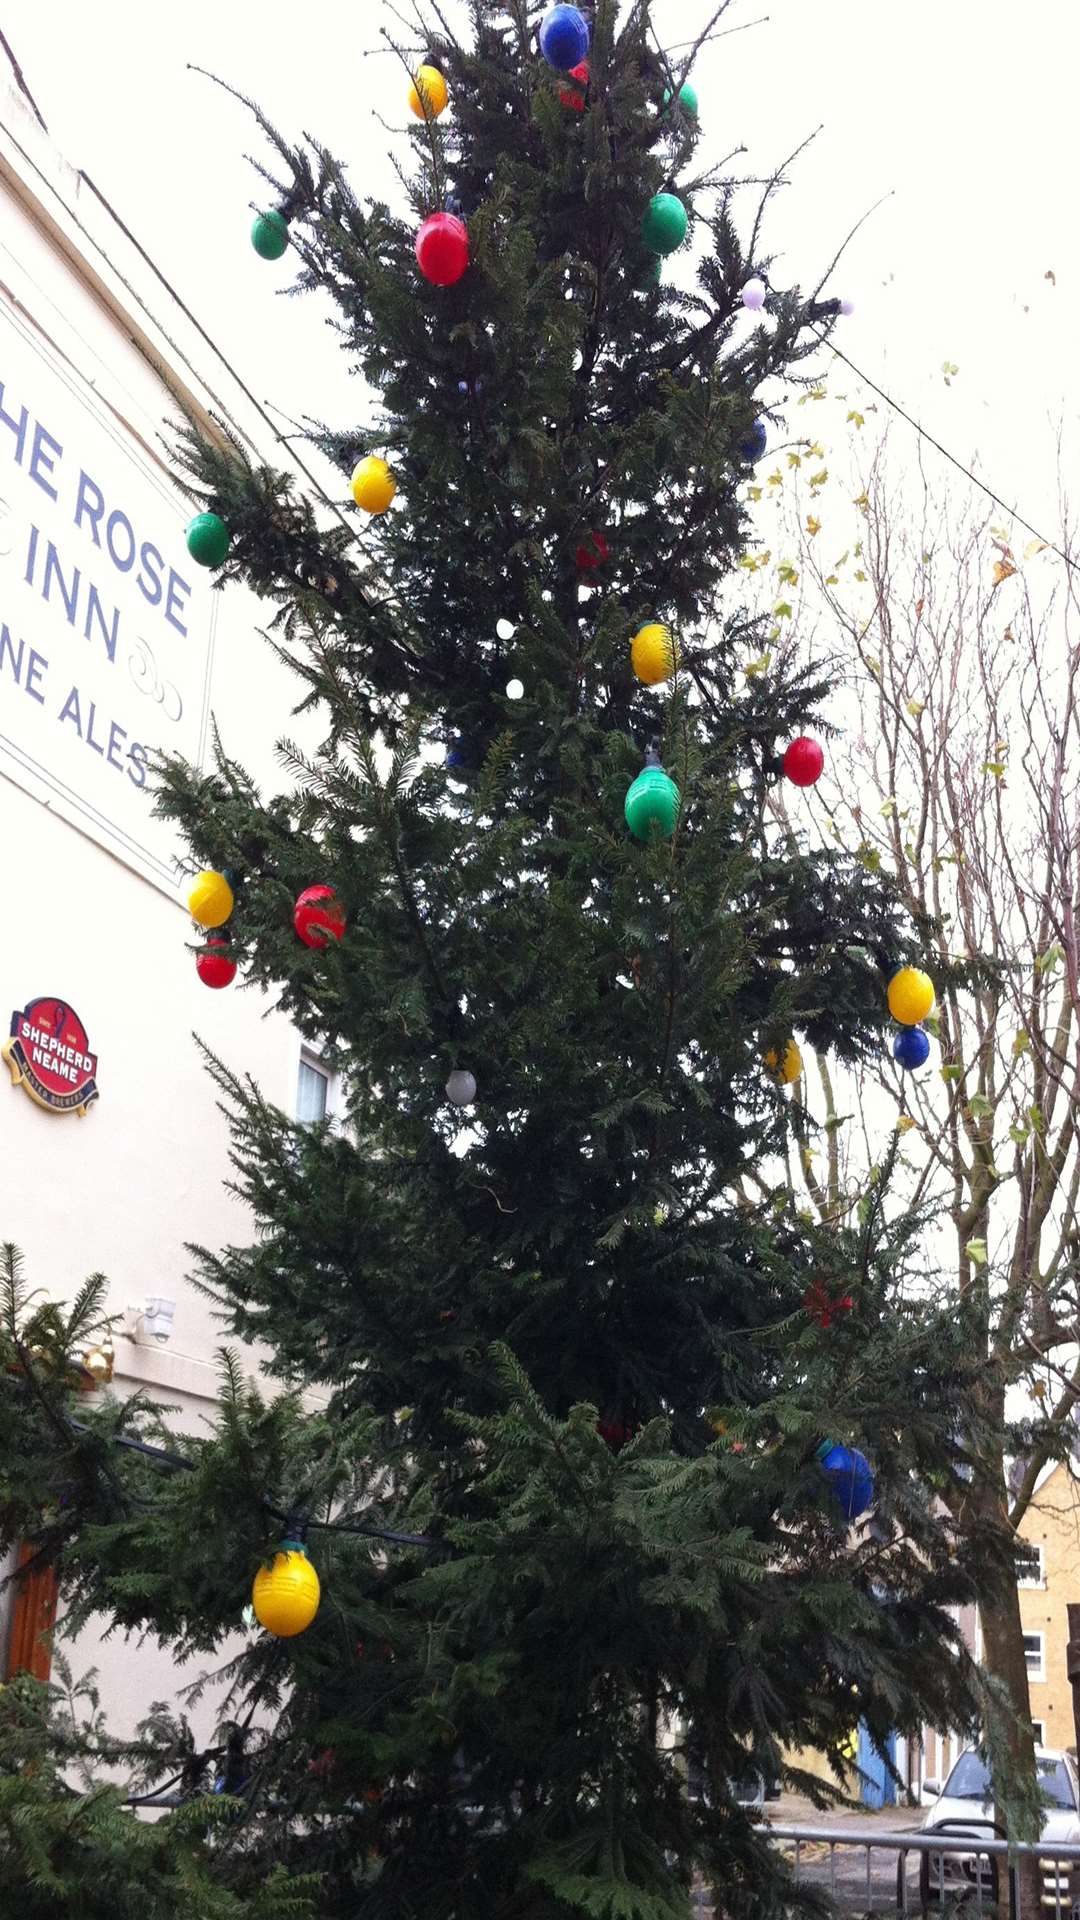 Herne Bay christmas tree dubbed the 'worst in Britain'